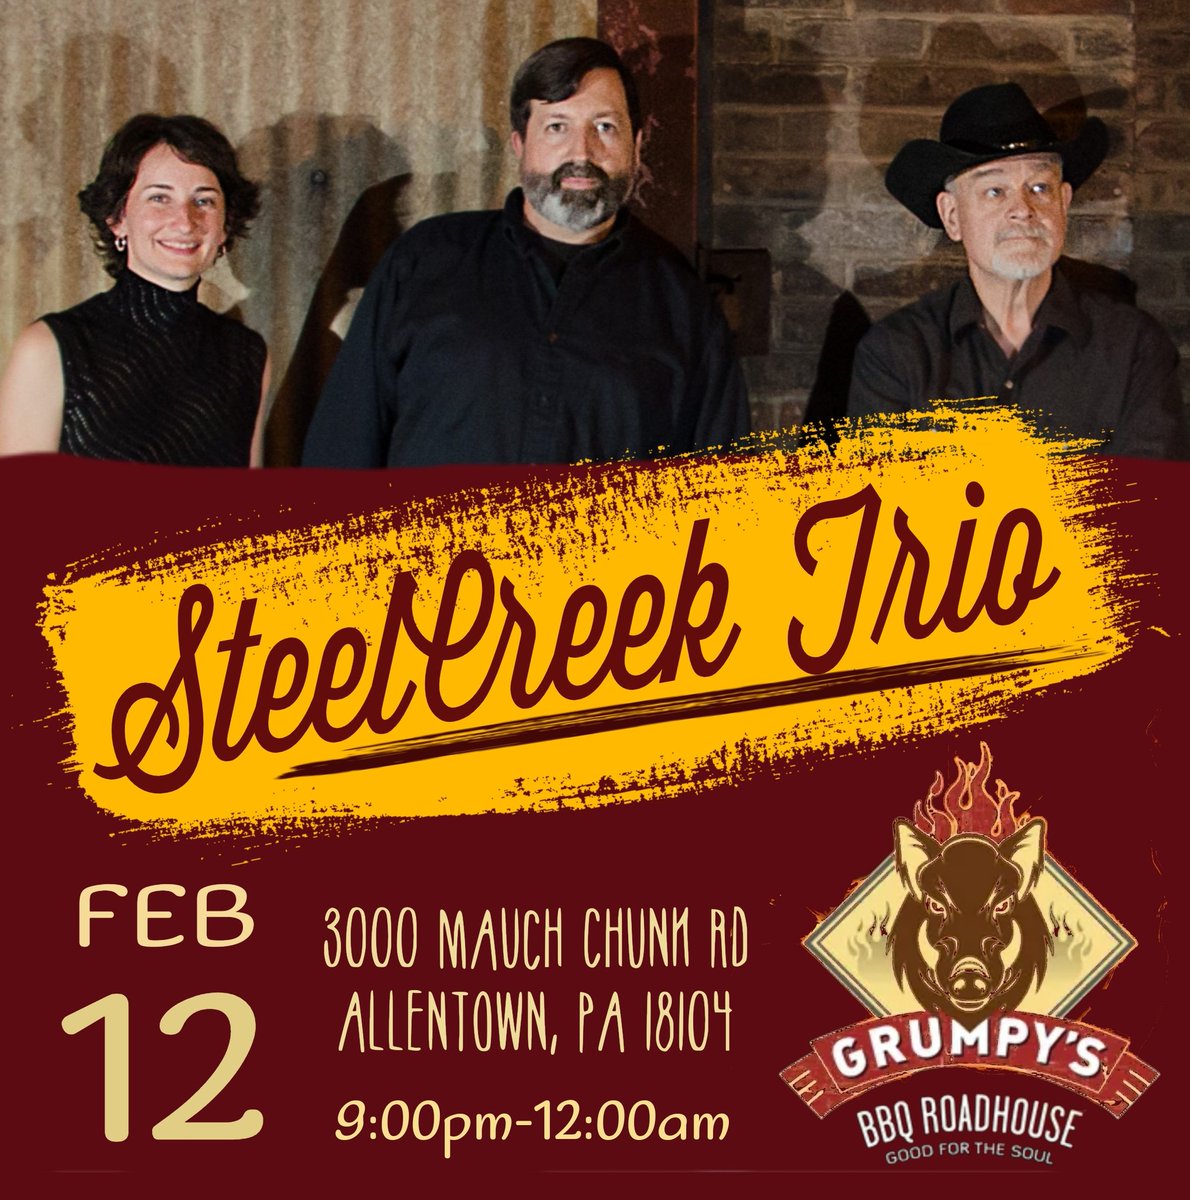 2 shows today:
#SteelCreekTrio #AcousticMusic #CountryMusic #LiveMusic